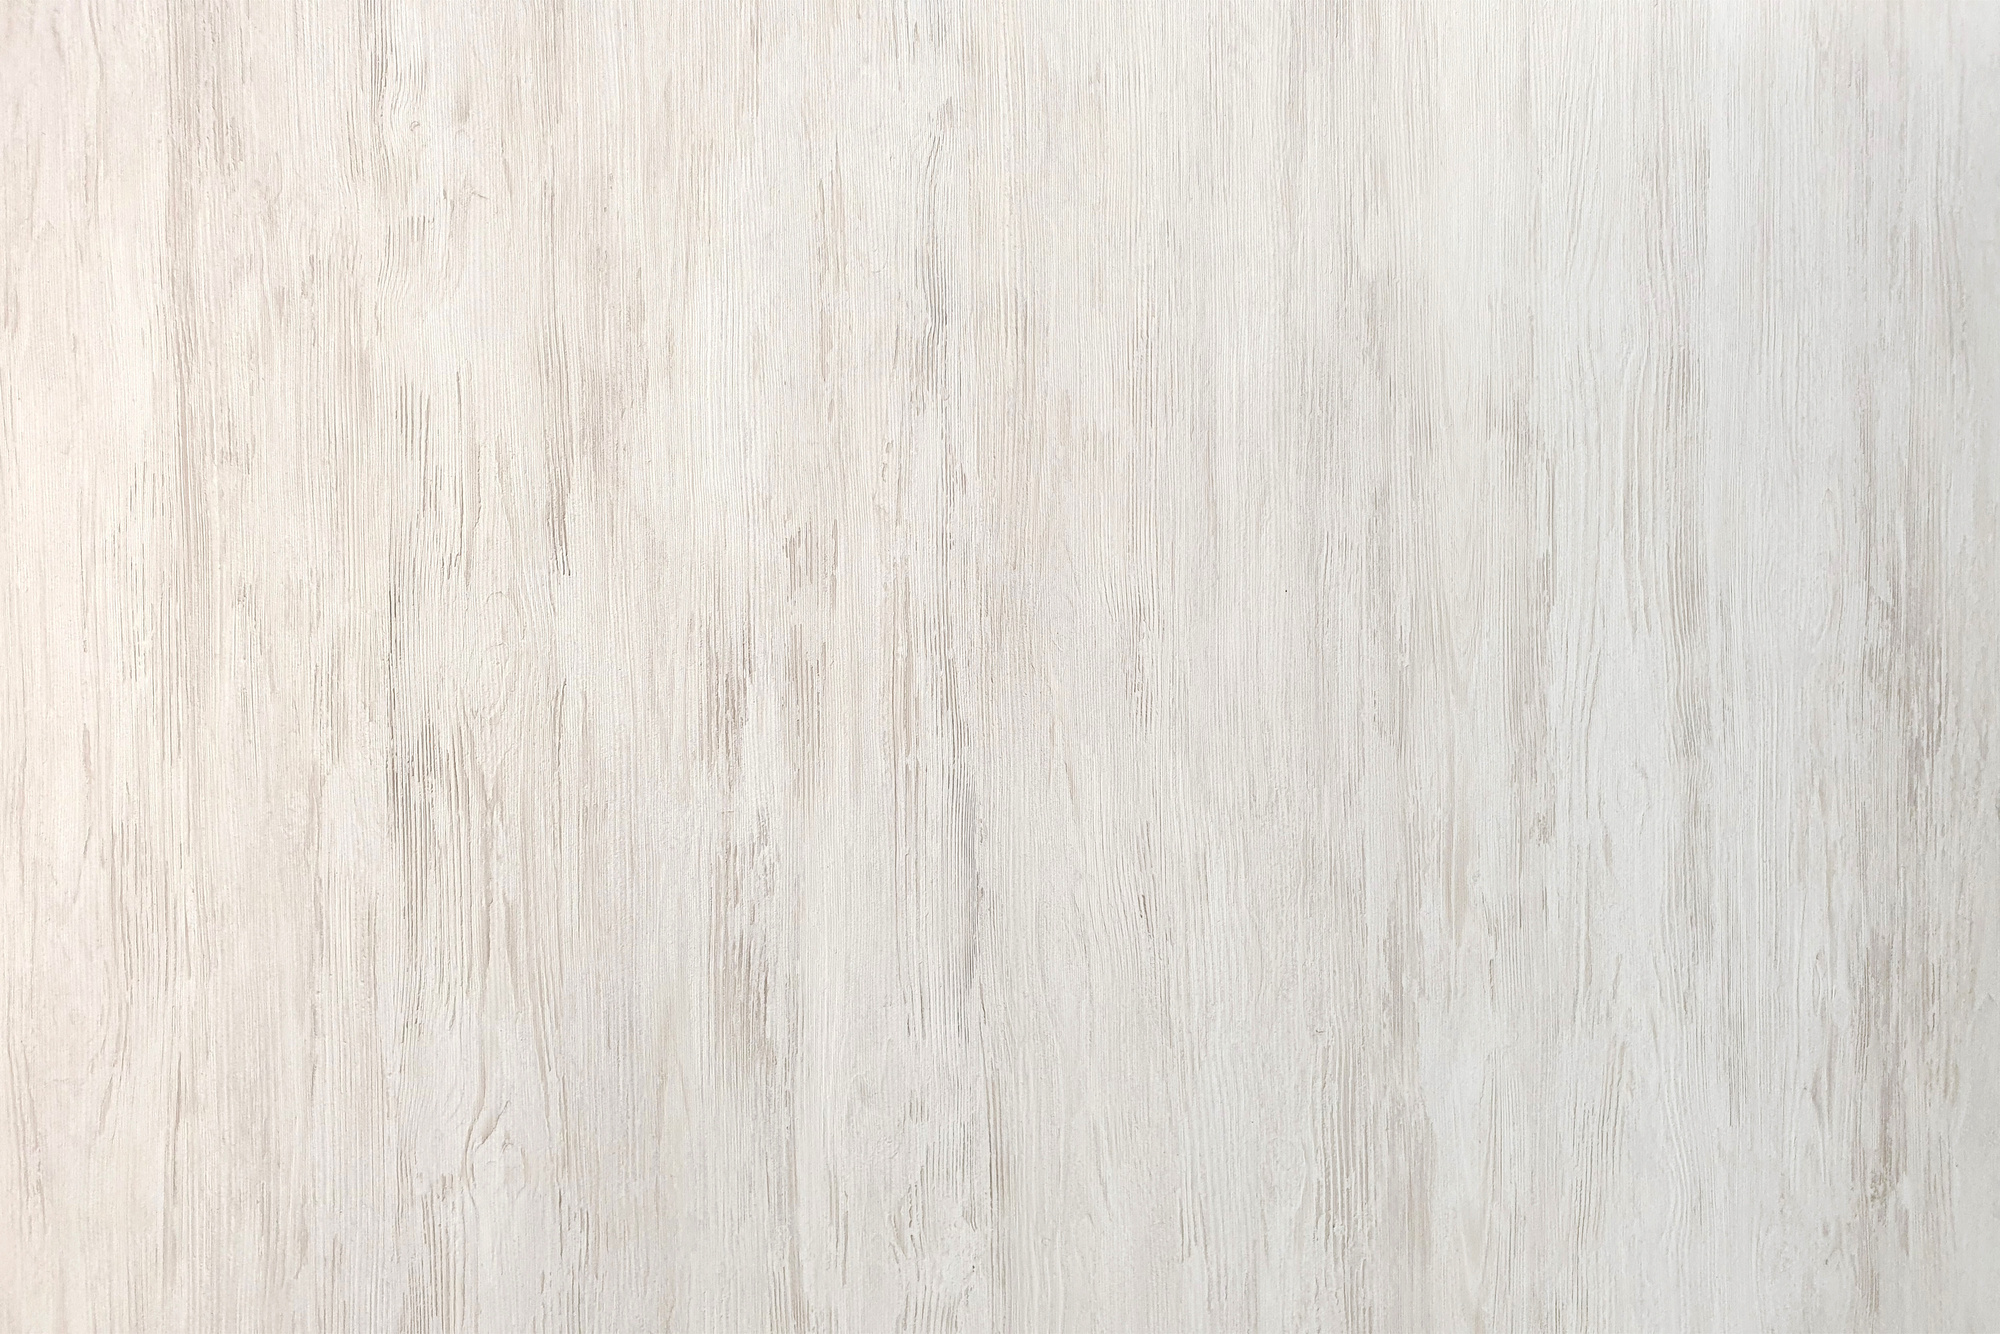 White Washed Old Wood Background Texture